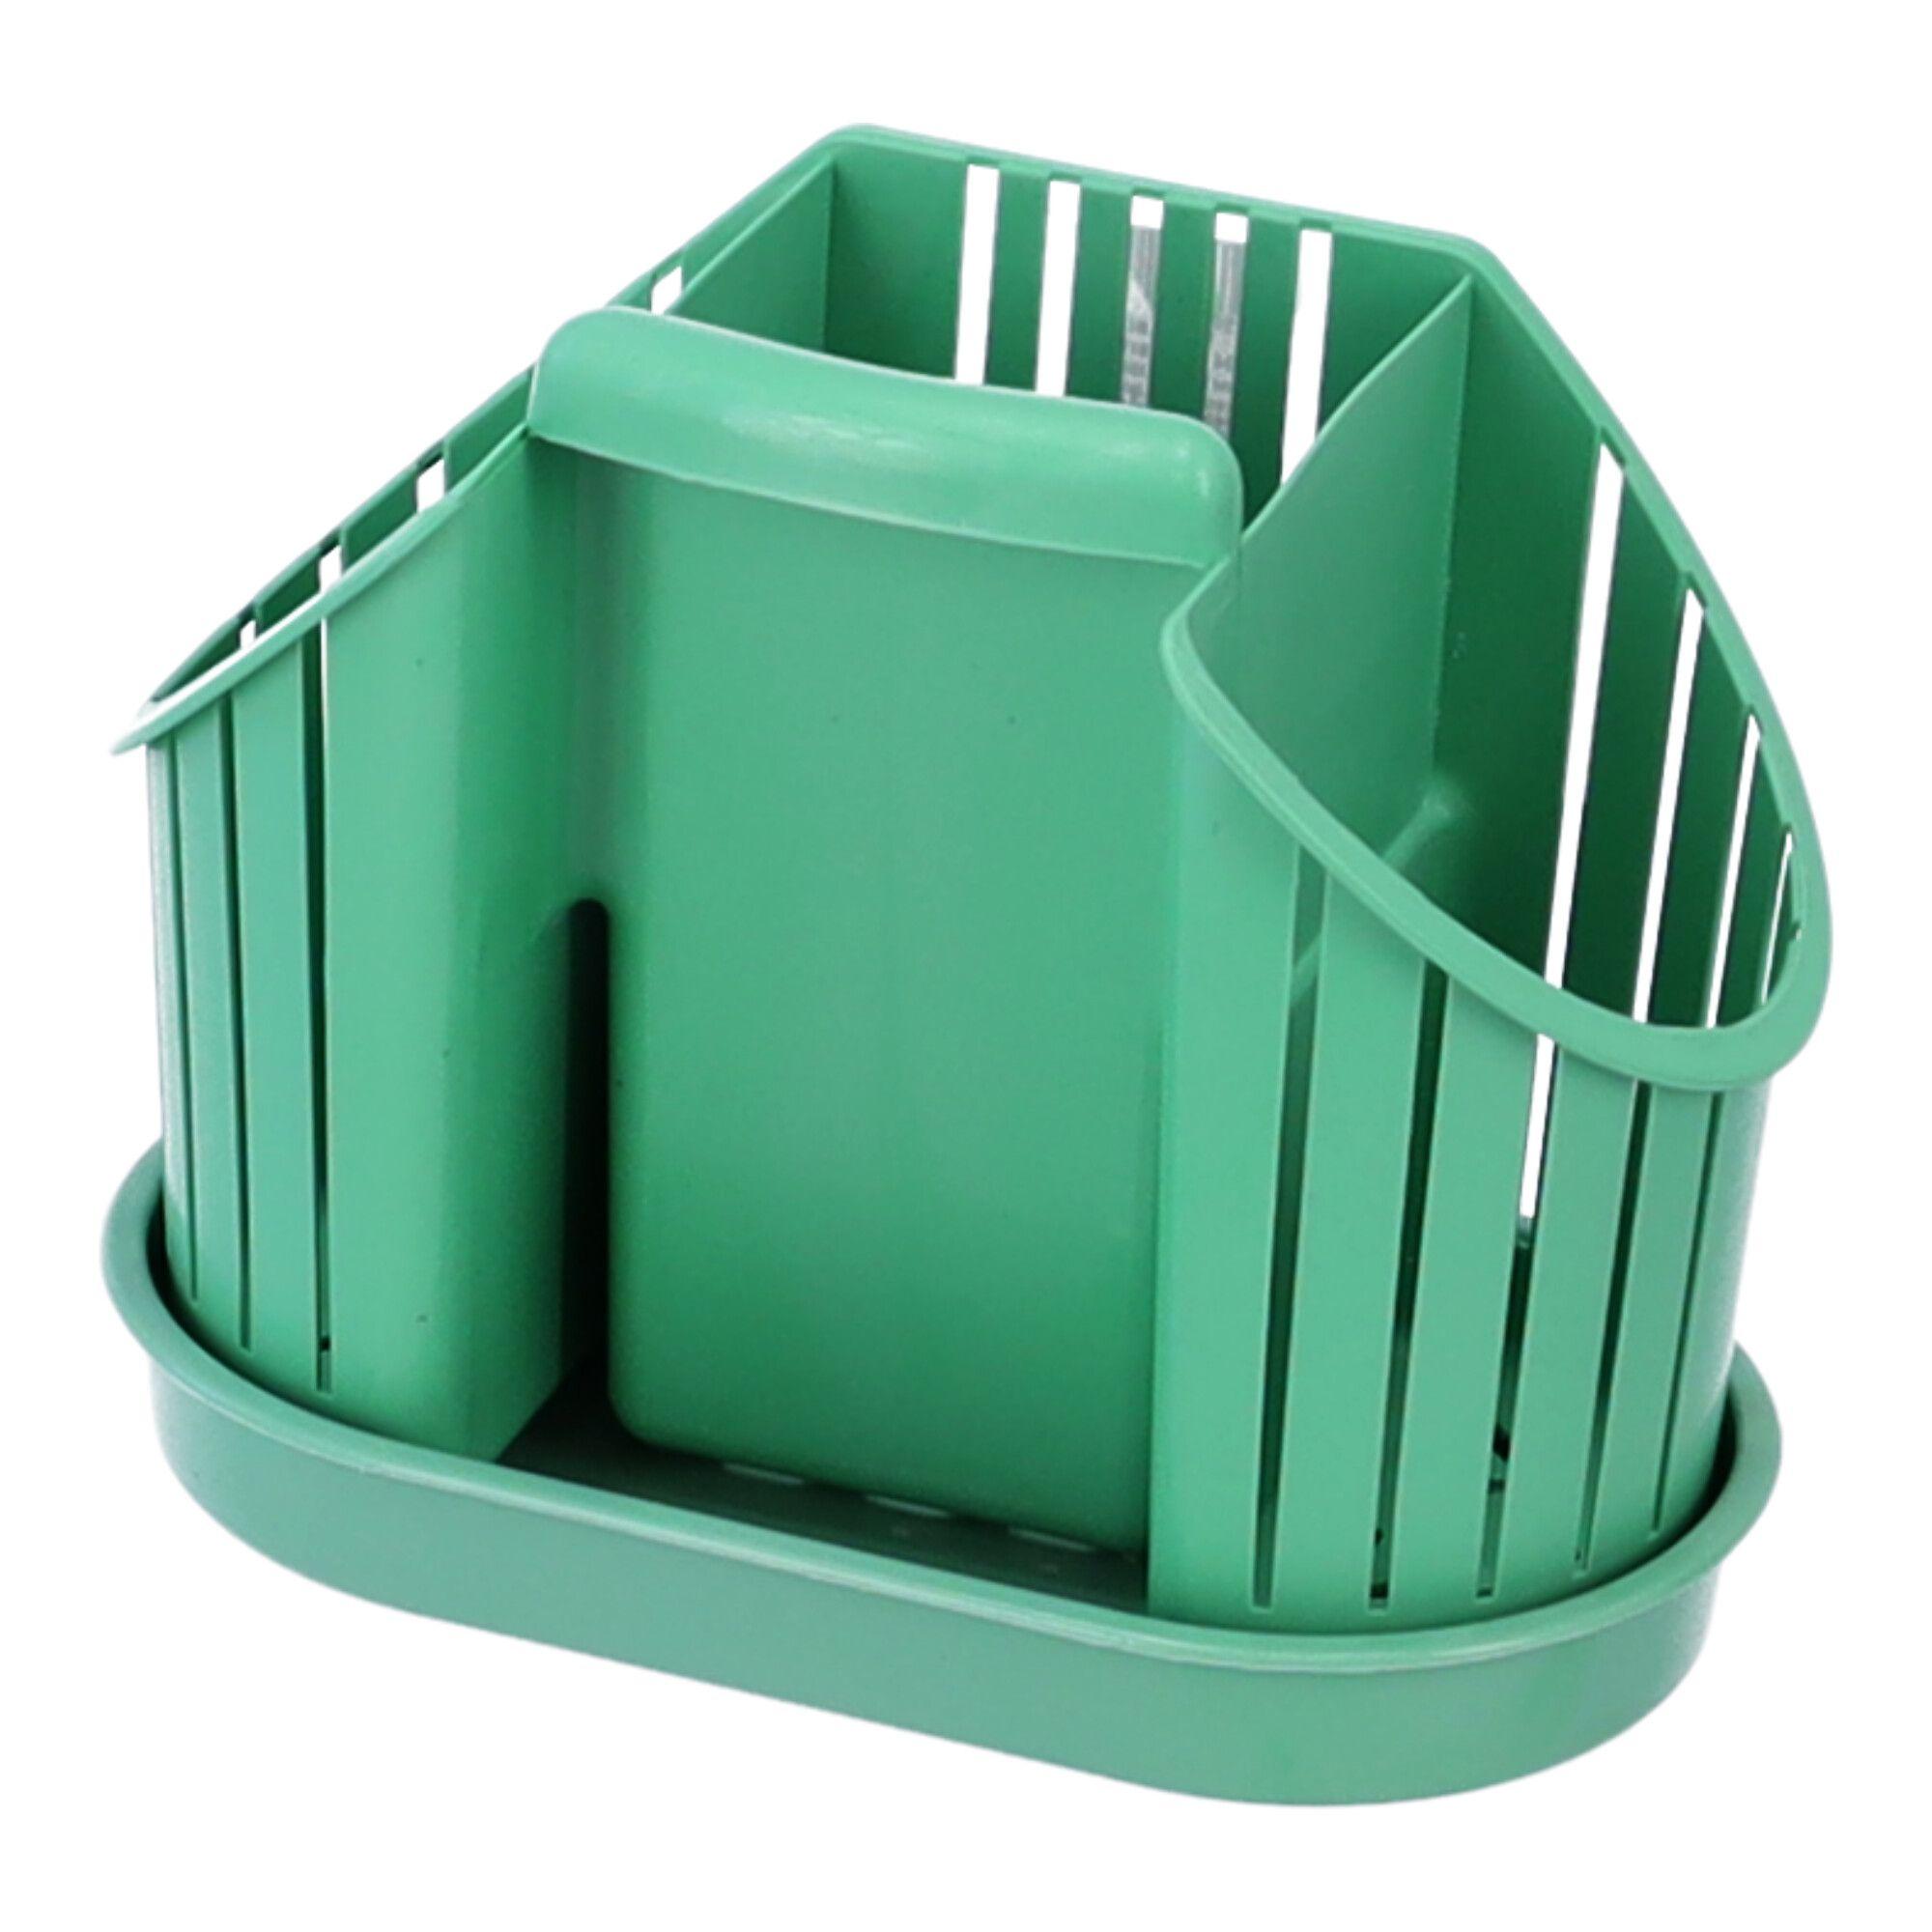 Cutlery drainer with stand, POLISH PRODUCT